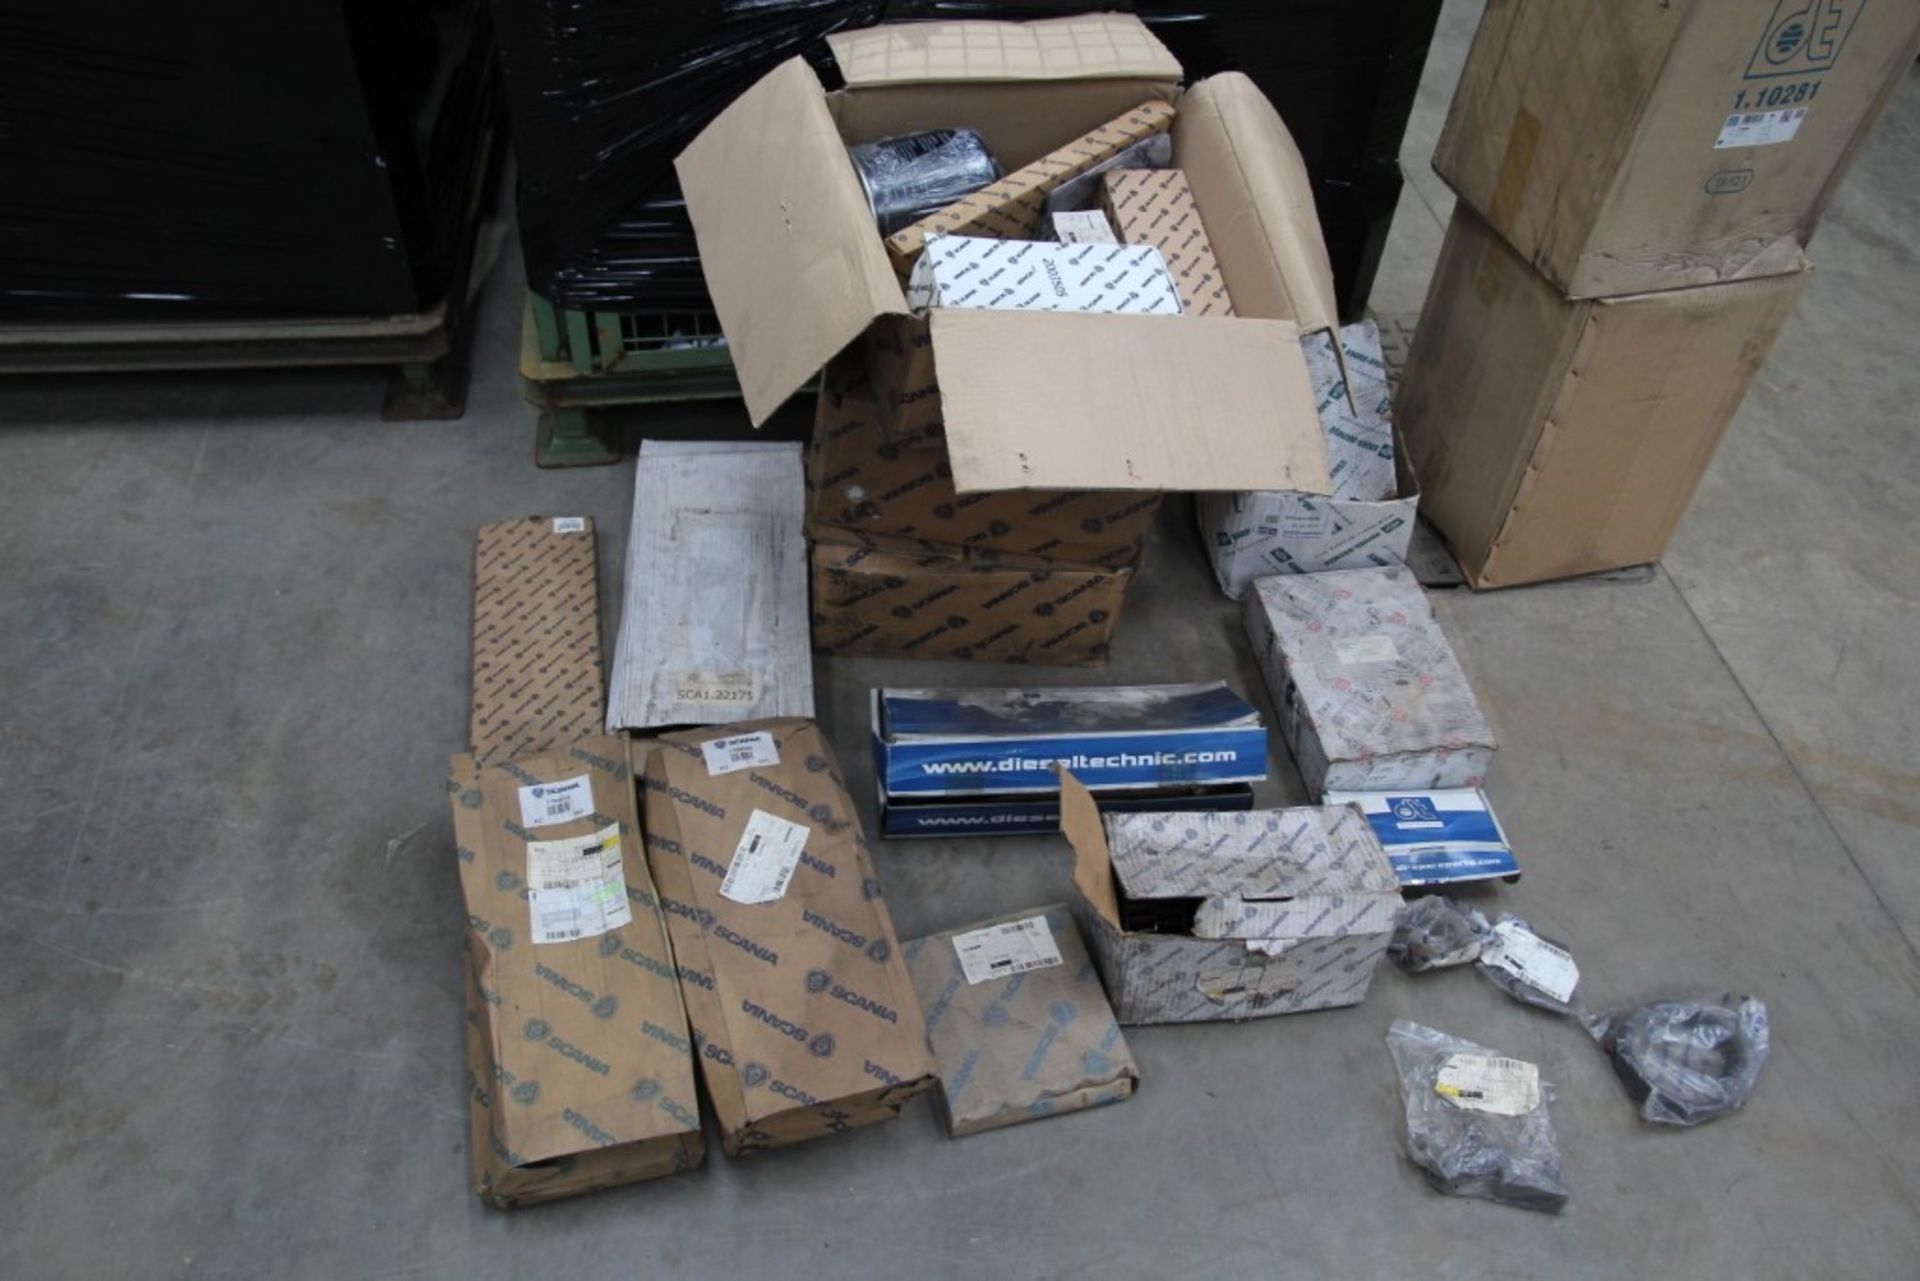 Scania Parts (1 Pallet) - Image 18 of 27